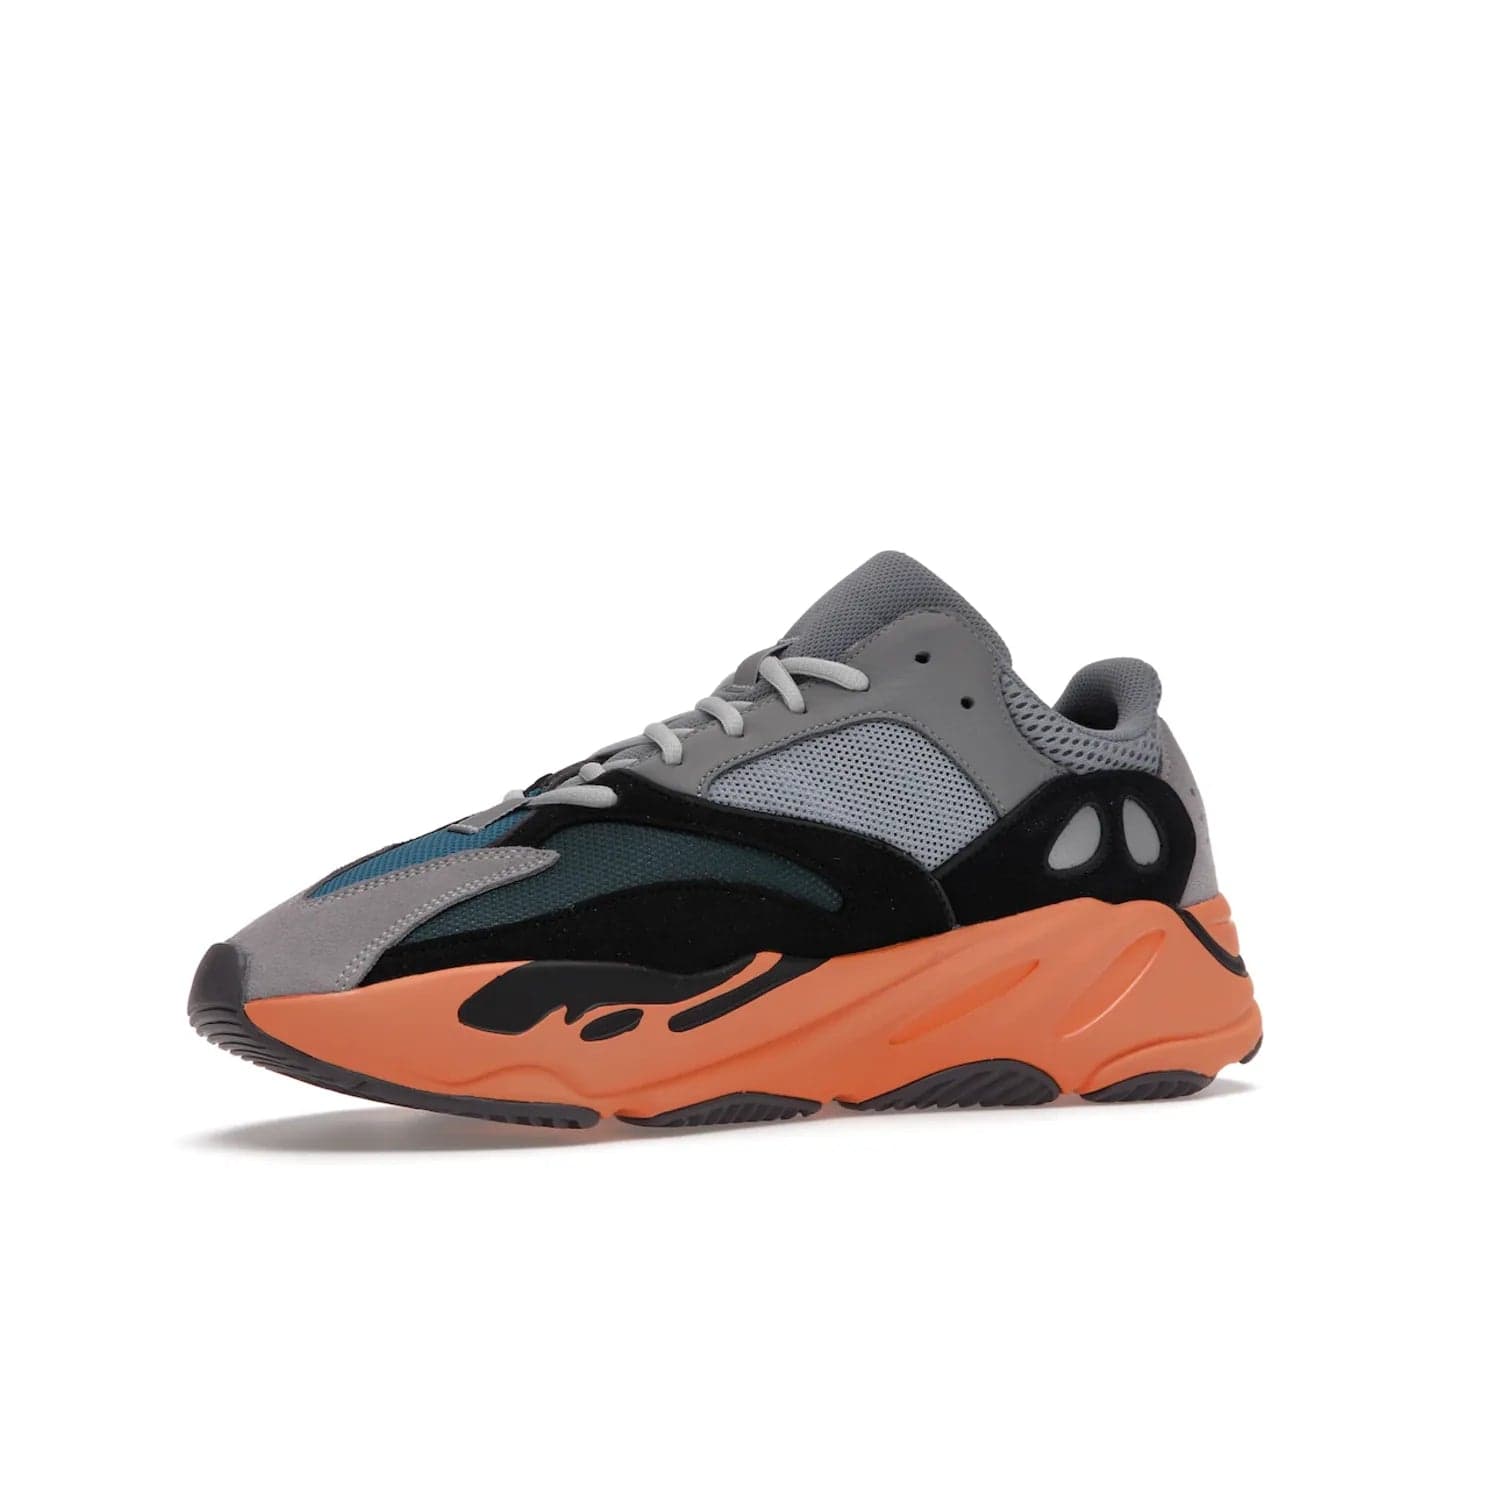 adidas Yeezy Boost 700 Wash Orange - Image 16 - Only at www.BallersClubKickz.com - Introducing the adidas Yeezy Boost 700 Wash Orange. Unique grey leather, suede, mesh upper and teal panels with a chunky Wash Orange Boost midsole. Release October 2021, make a statement today!